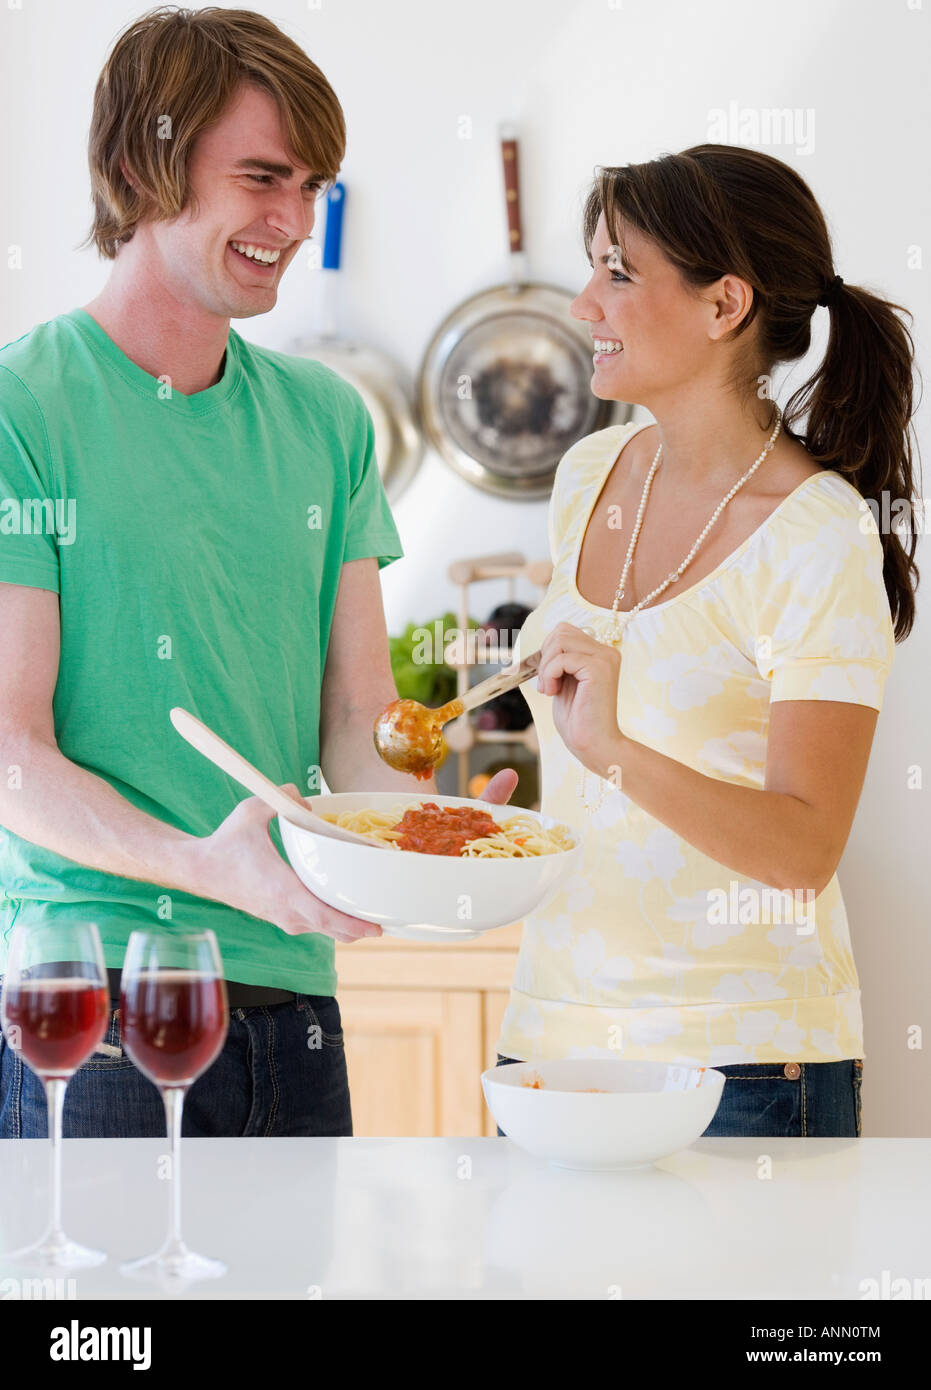 Couple preparing food in kitchen Banque D'Images